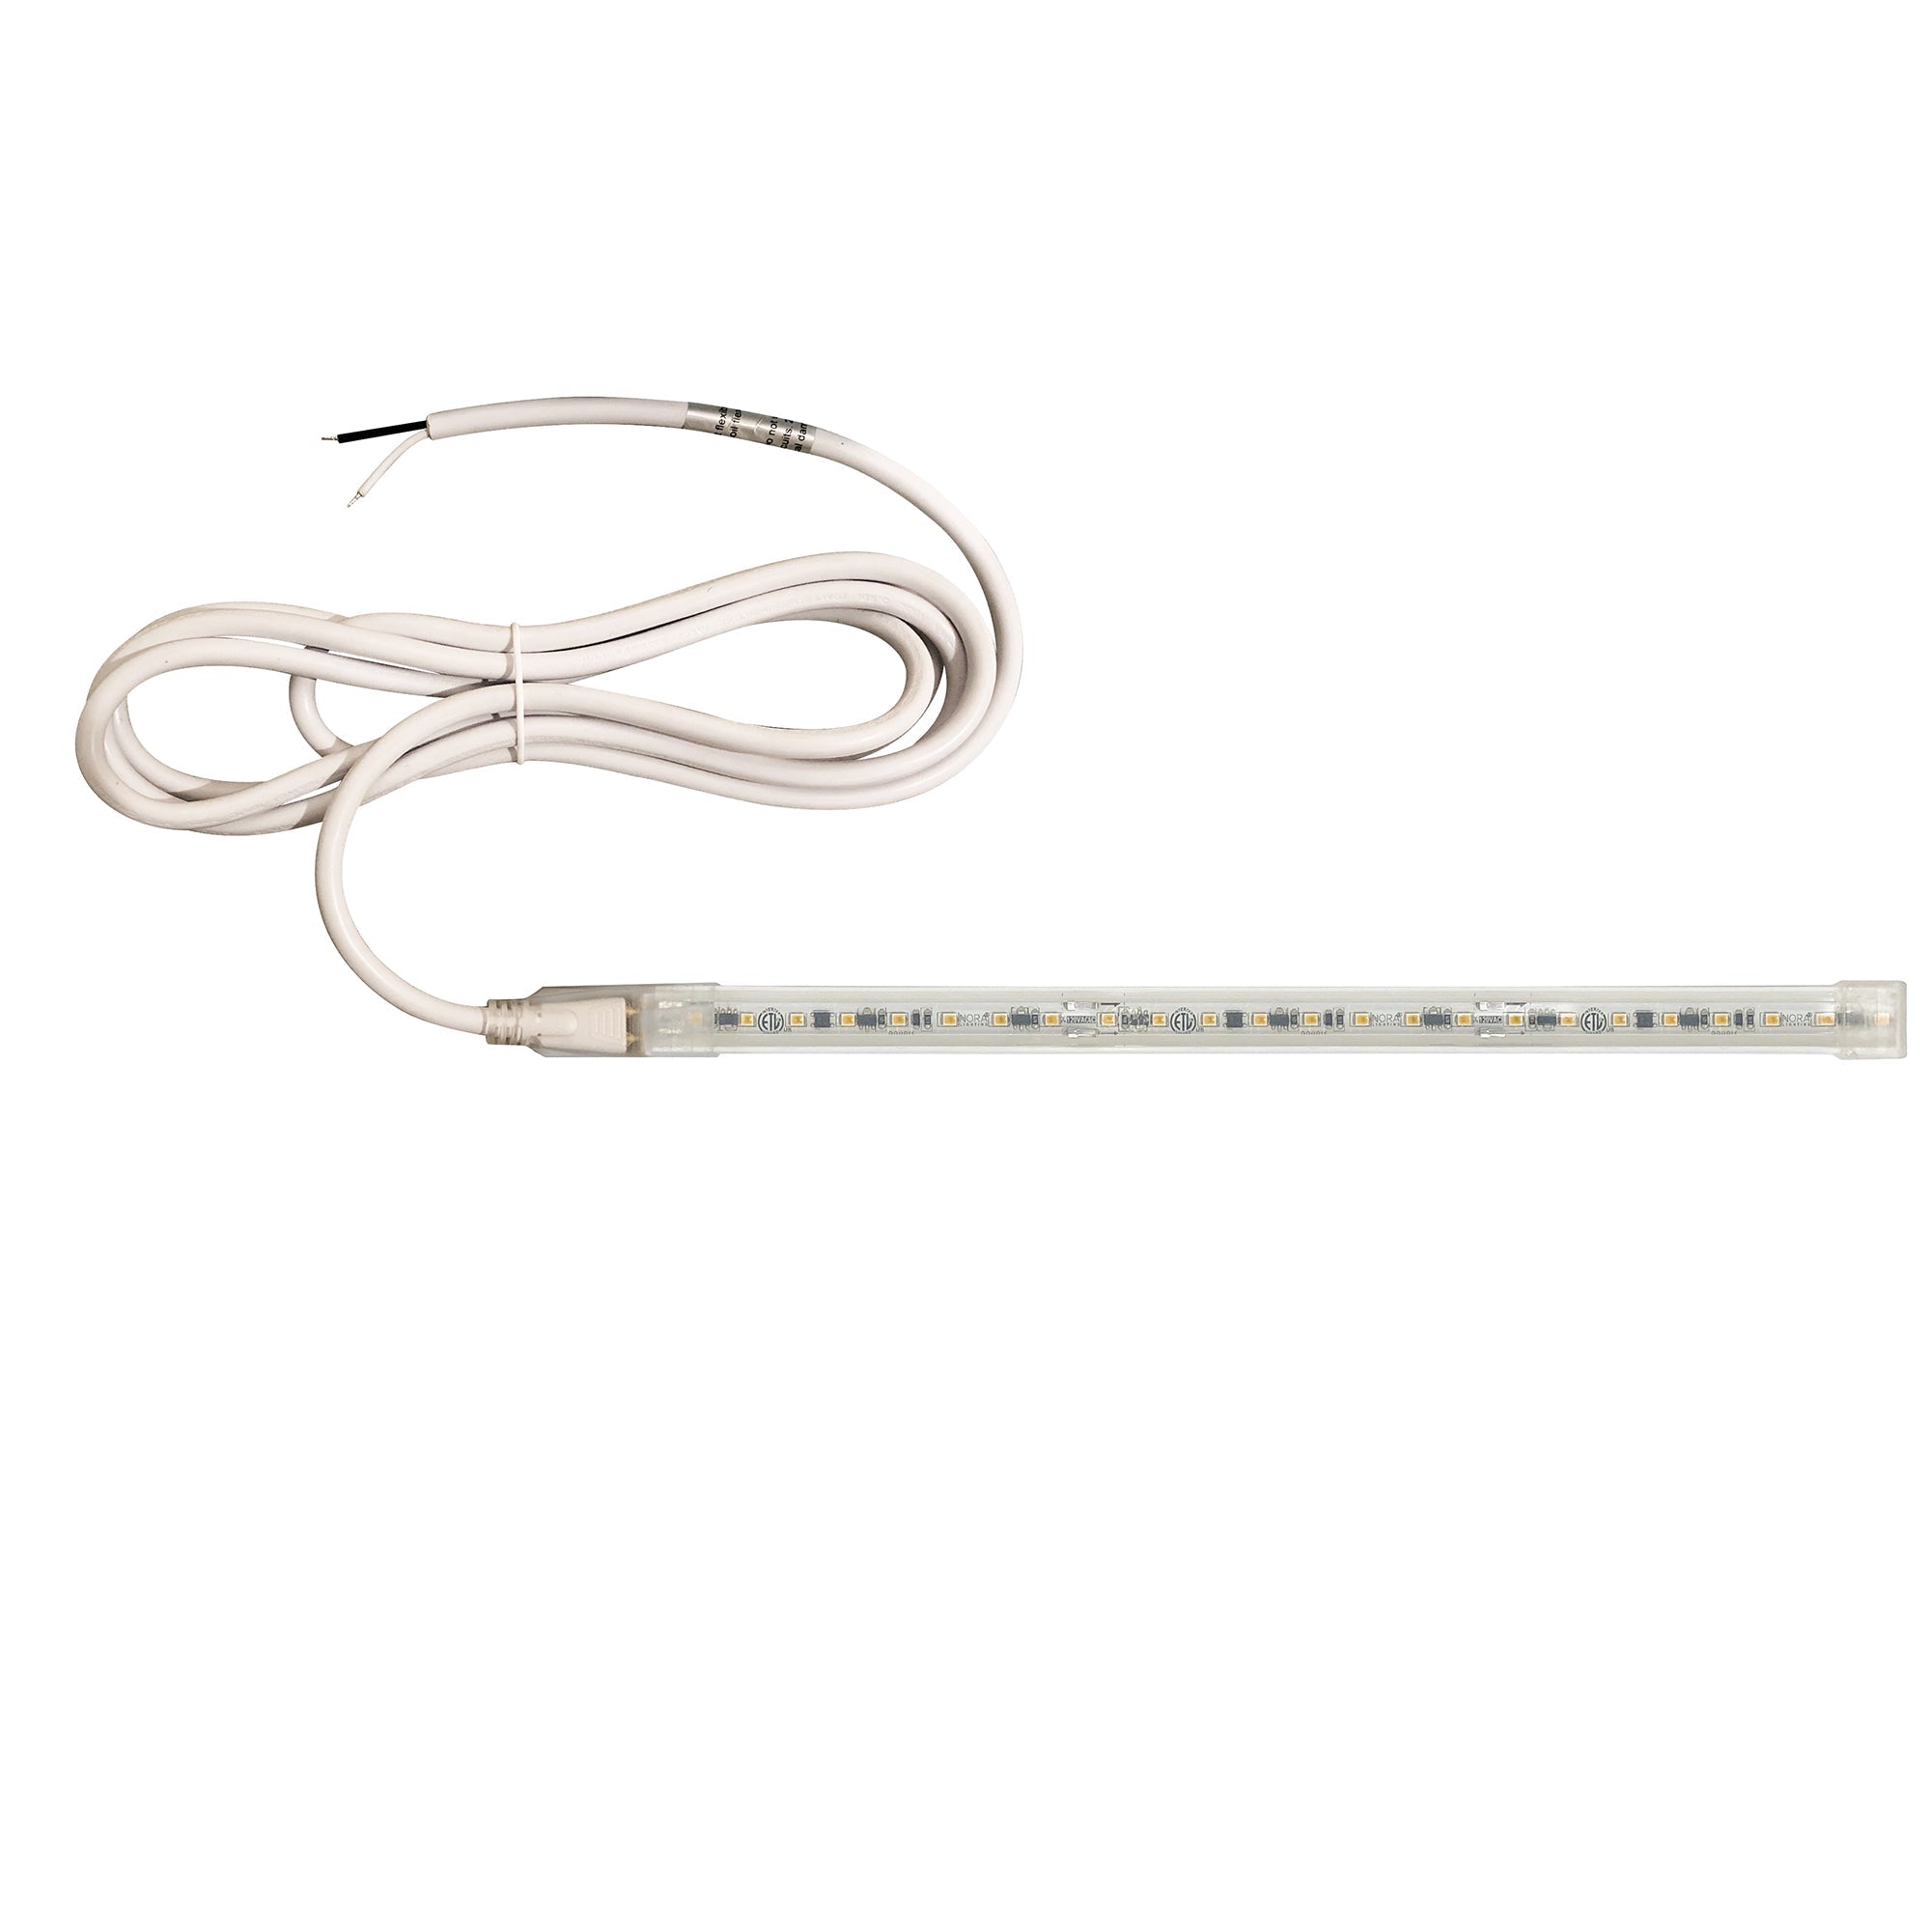 Nora Lighting NUTP13-W7-8-12-930/HW - Accent / Undercabinet - Custom Cut 7-ft, 8-in 120V Continuous LED Tape Light, 330lm / 3.6W per foot, 3000K, w/ Mounting Clips and 8' Hardwired Power Cord